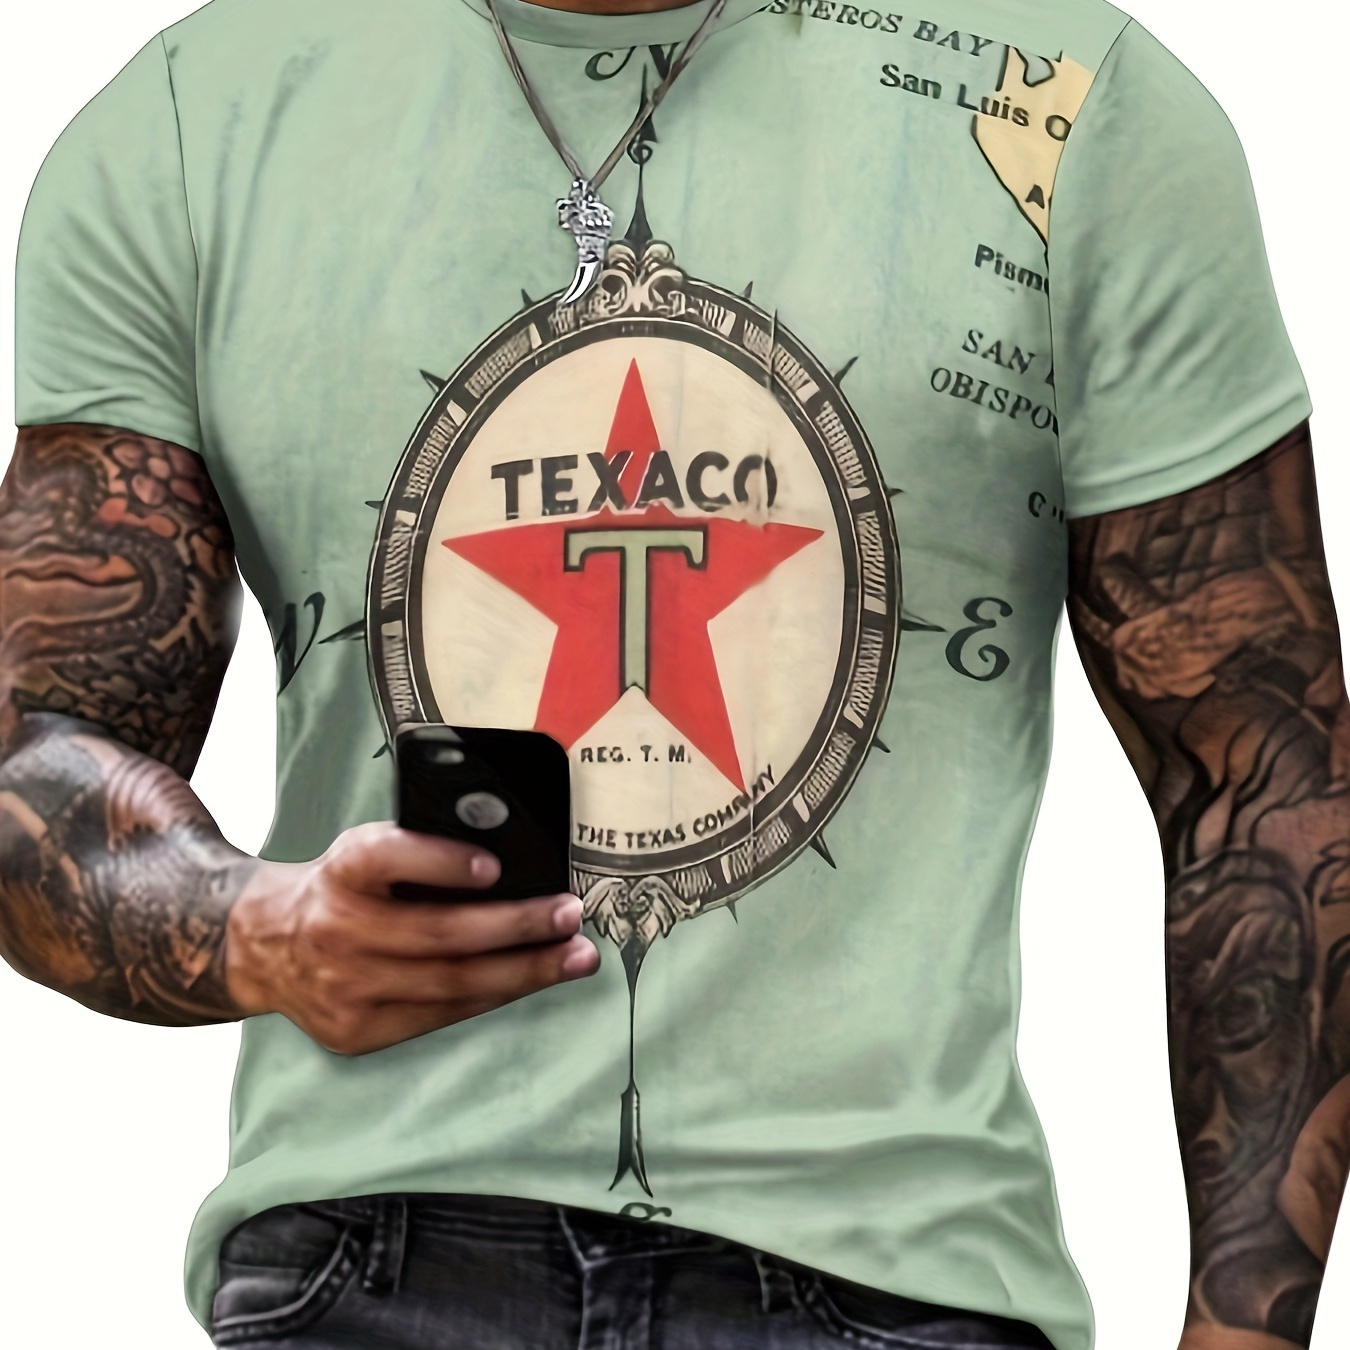 

Retro Pentacle Compass 3d Digital Printed Crew Neck Short Sleeve T-shirt For Men, Casual Summer T-shirt For Daily Wear And Vacation Resorts